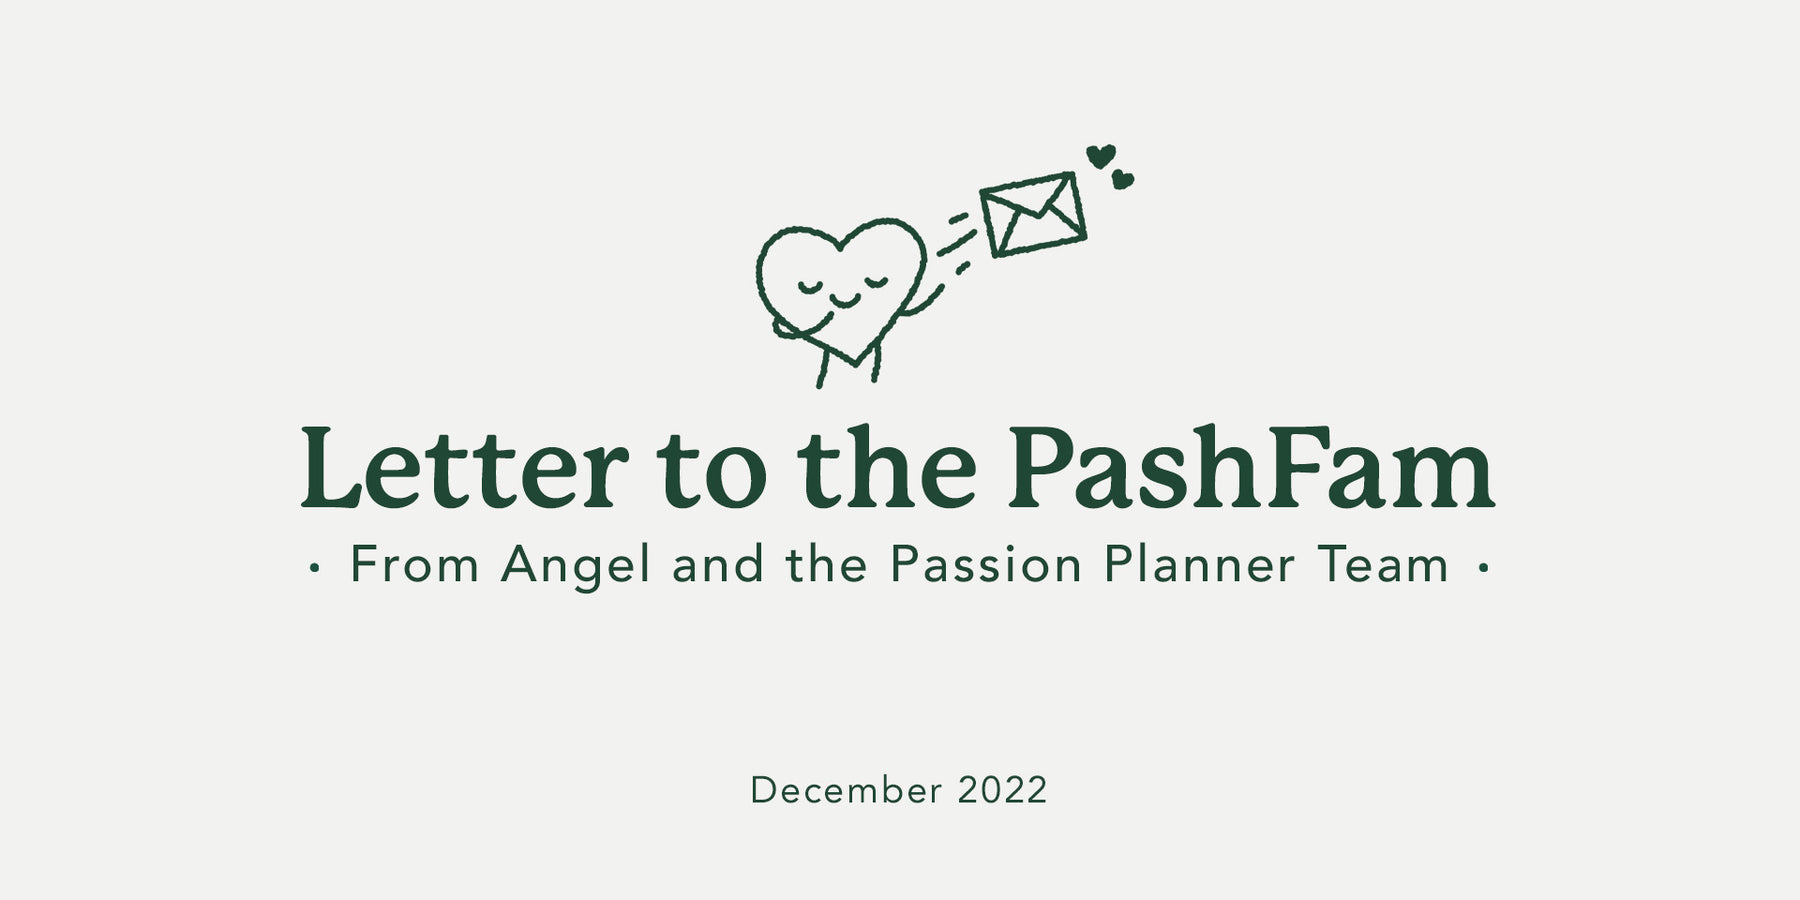 December 2022: A Letter to the PashFam